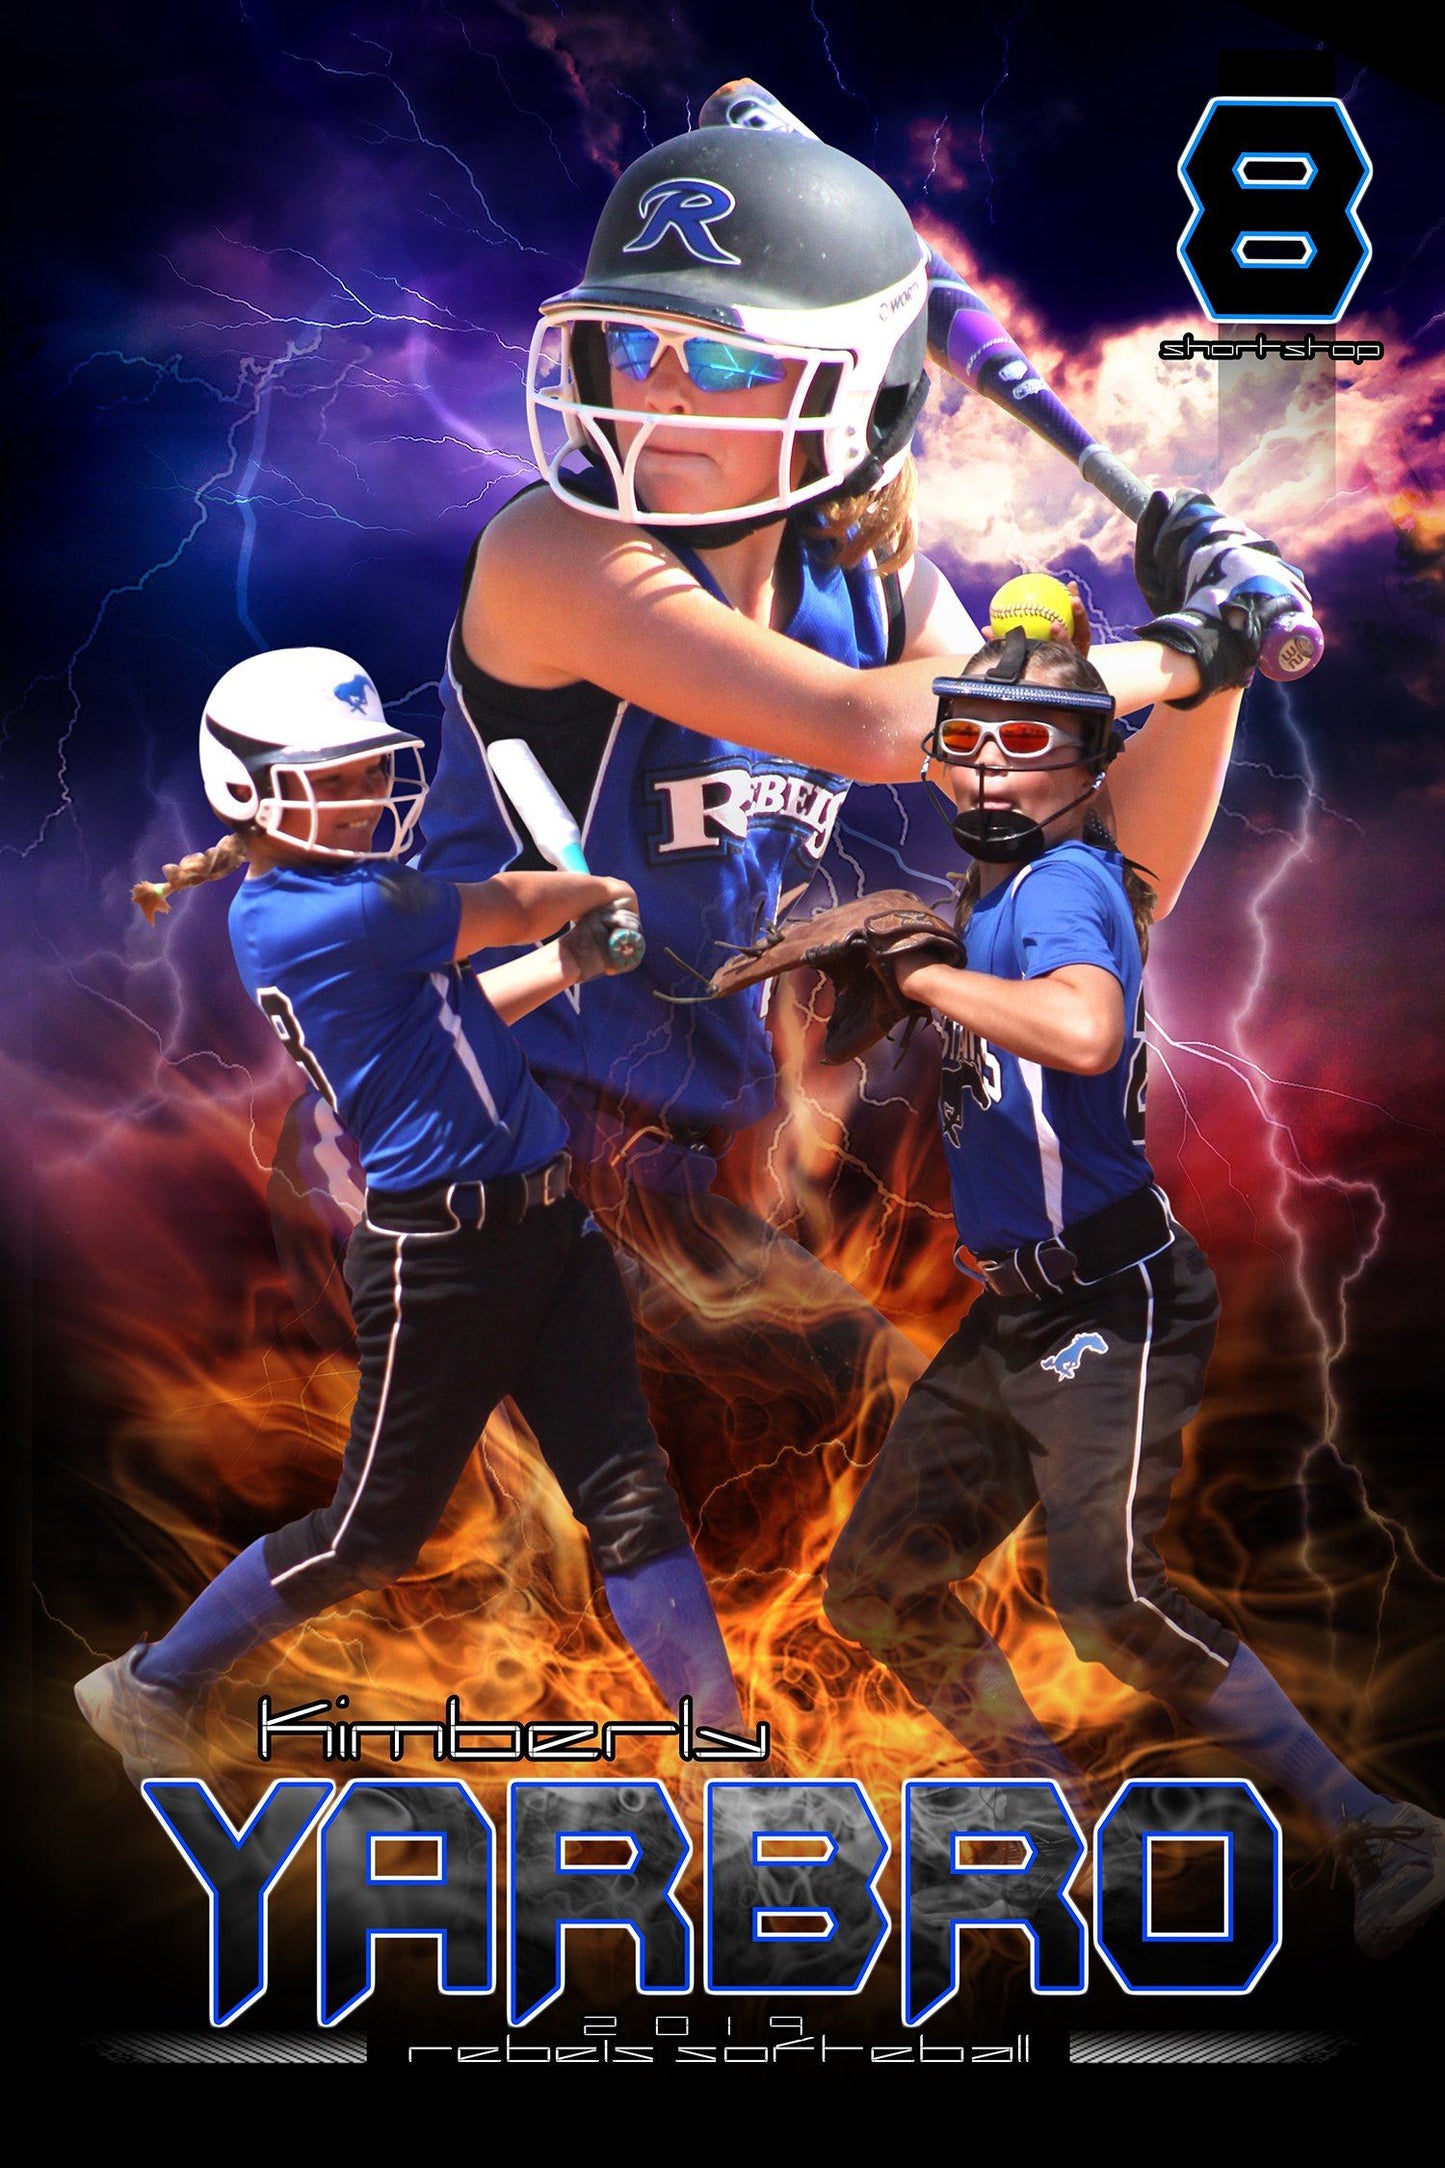 Thunderstruck v.2 - Action Extraction Poster/Banner-Photoshop Template - Photo Solutions